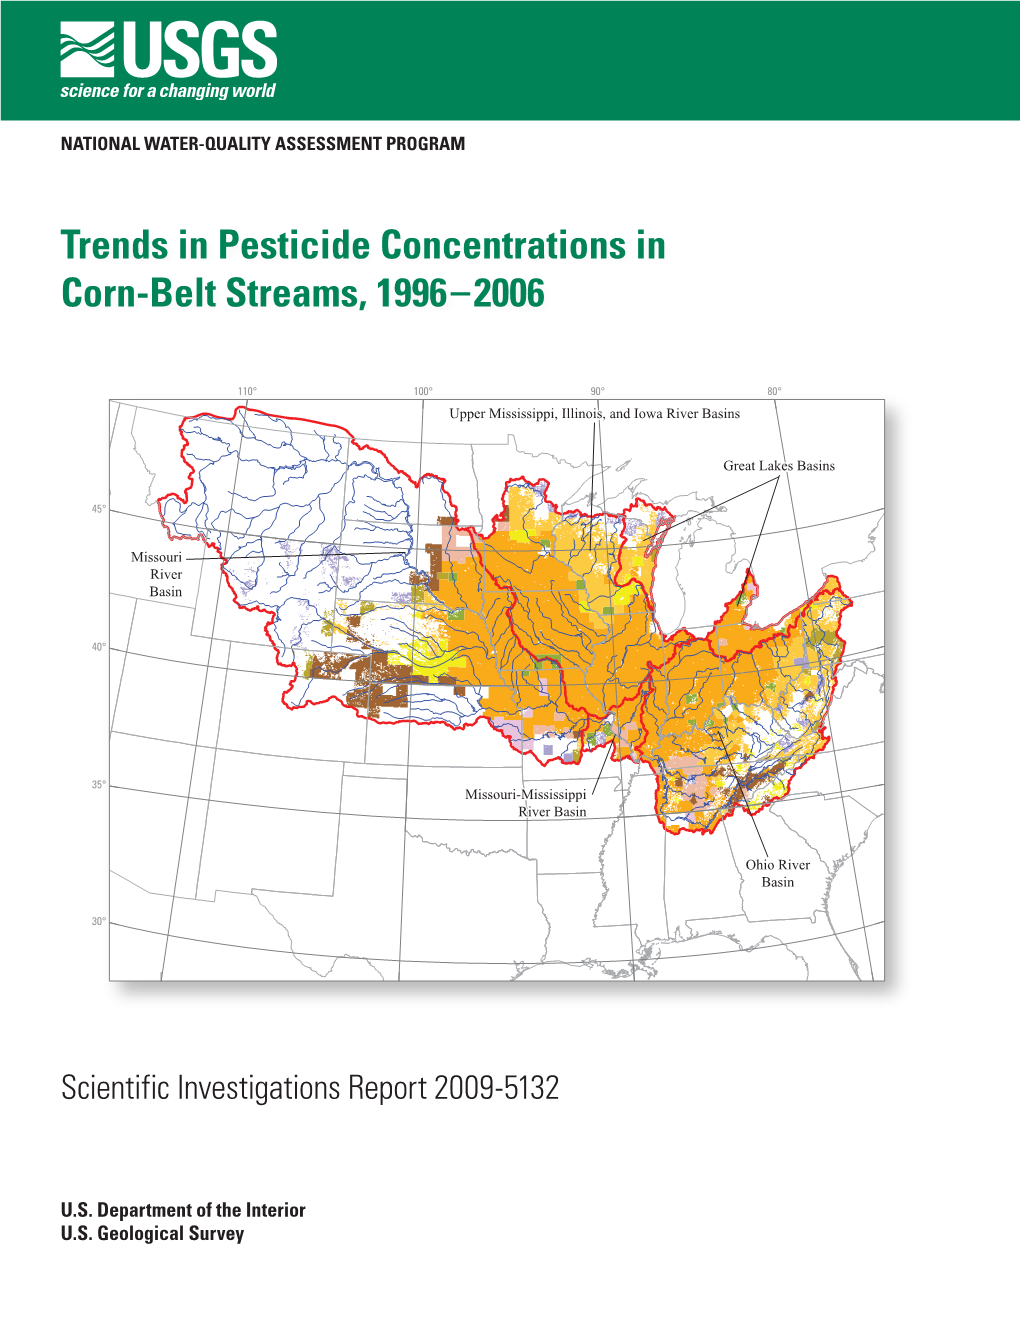 Trends in Pesticide Concentrations in Corn-Belt Streams, 1996–2006